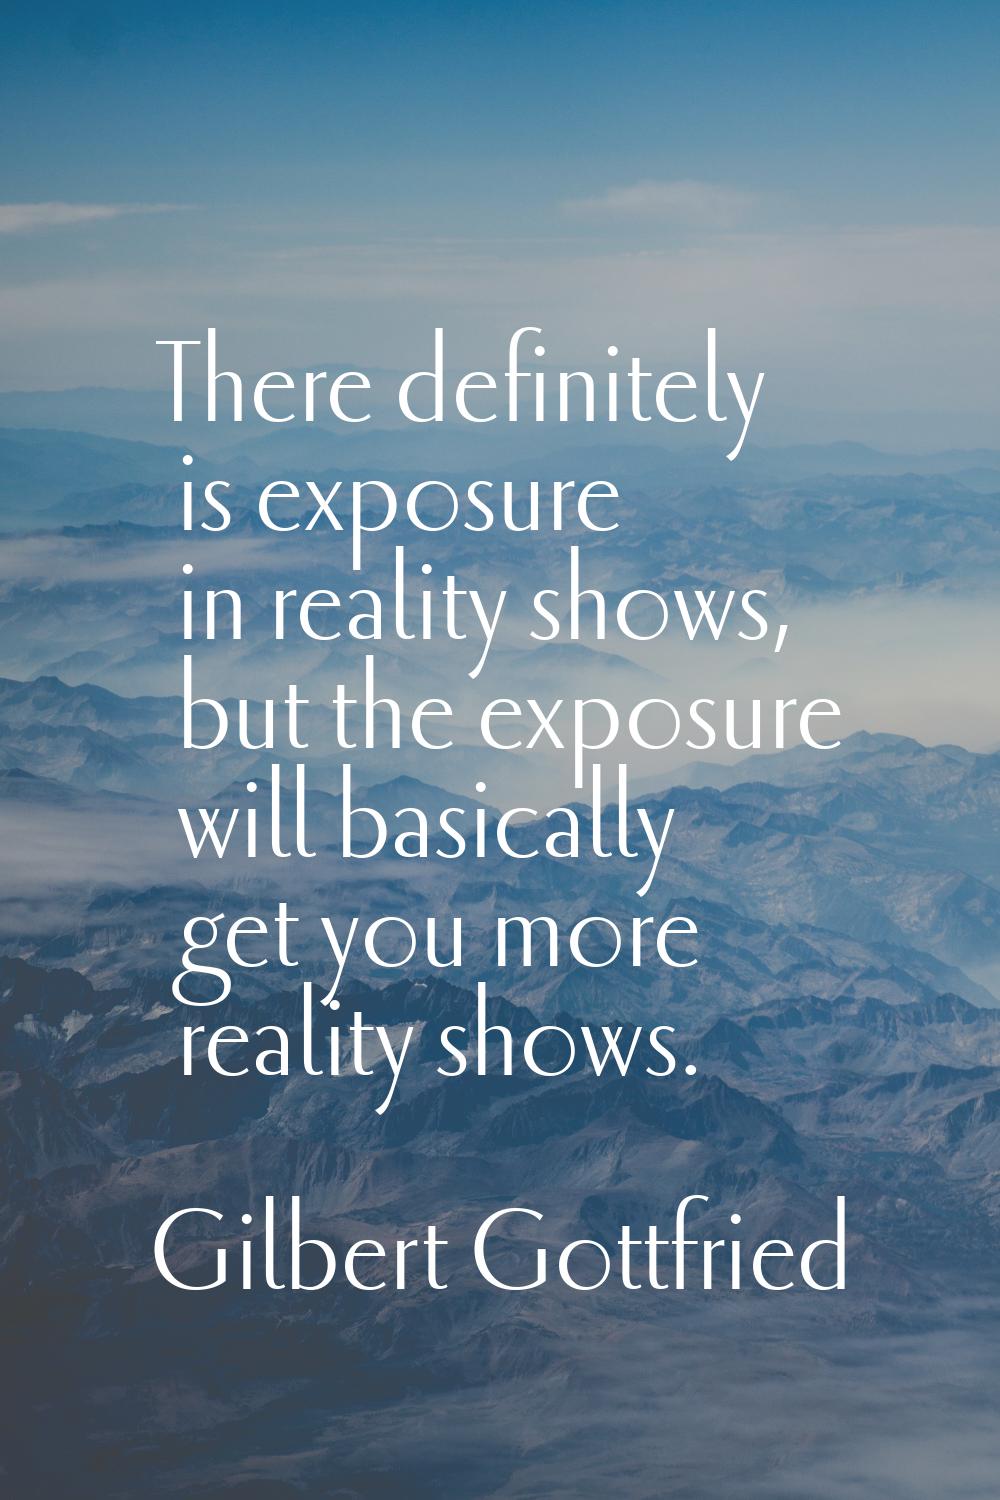 There definitely is exposure in reality shows, but the exposure will basically get you more reality